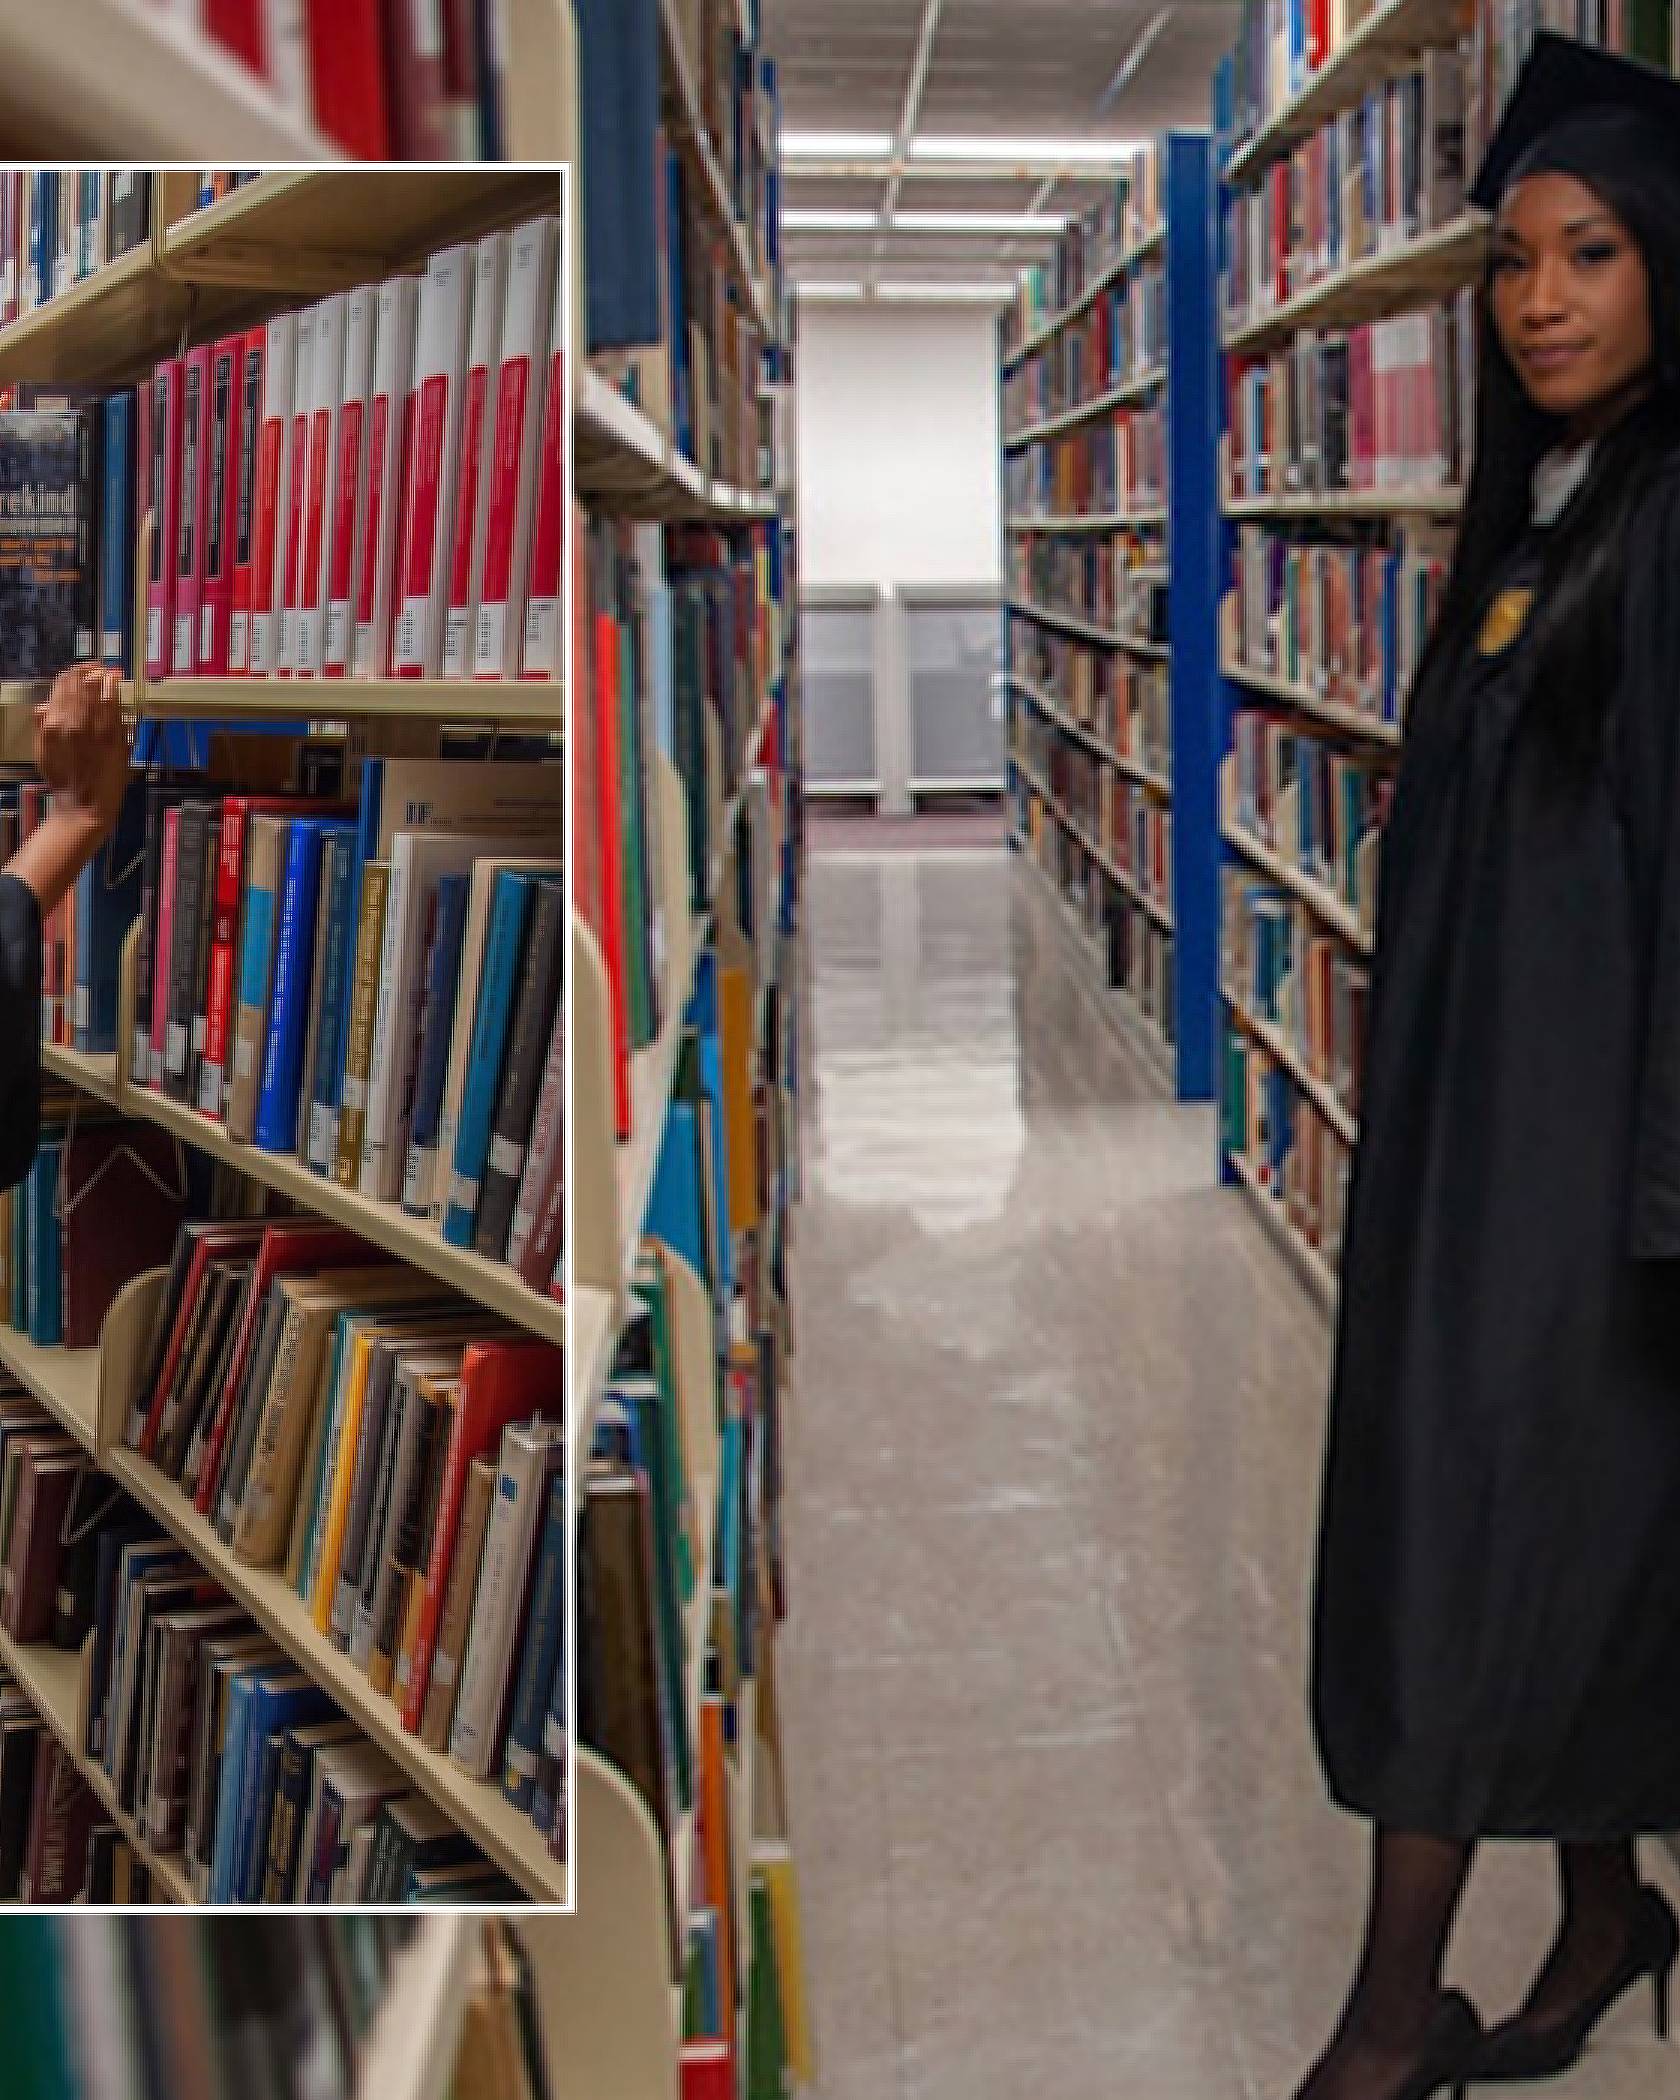 Side by side images of Asia Medley in a library wearing her graduation cap and gown.